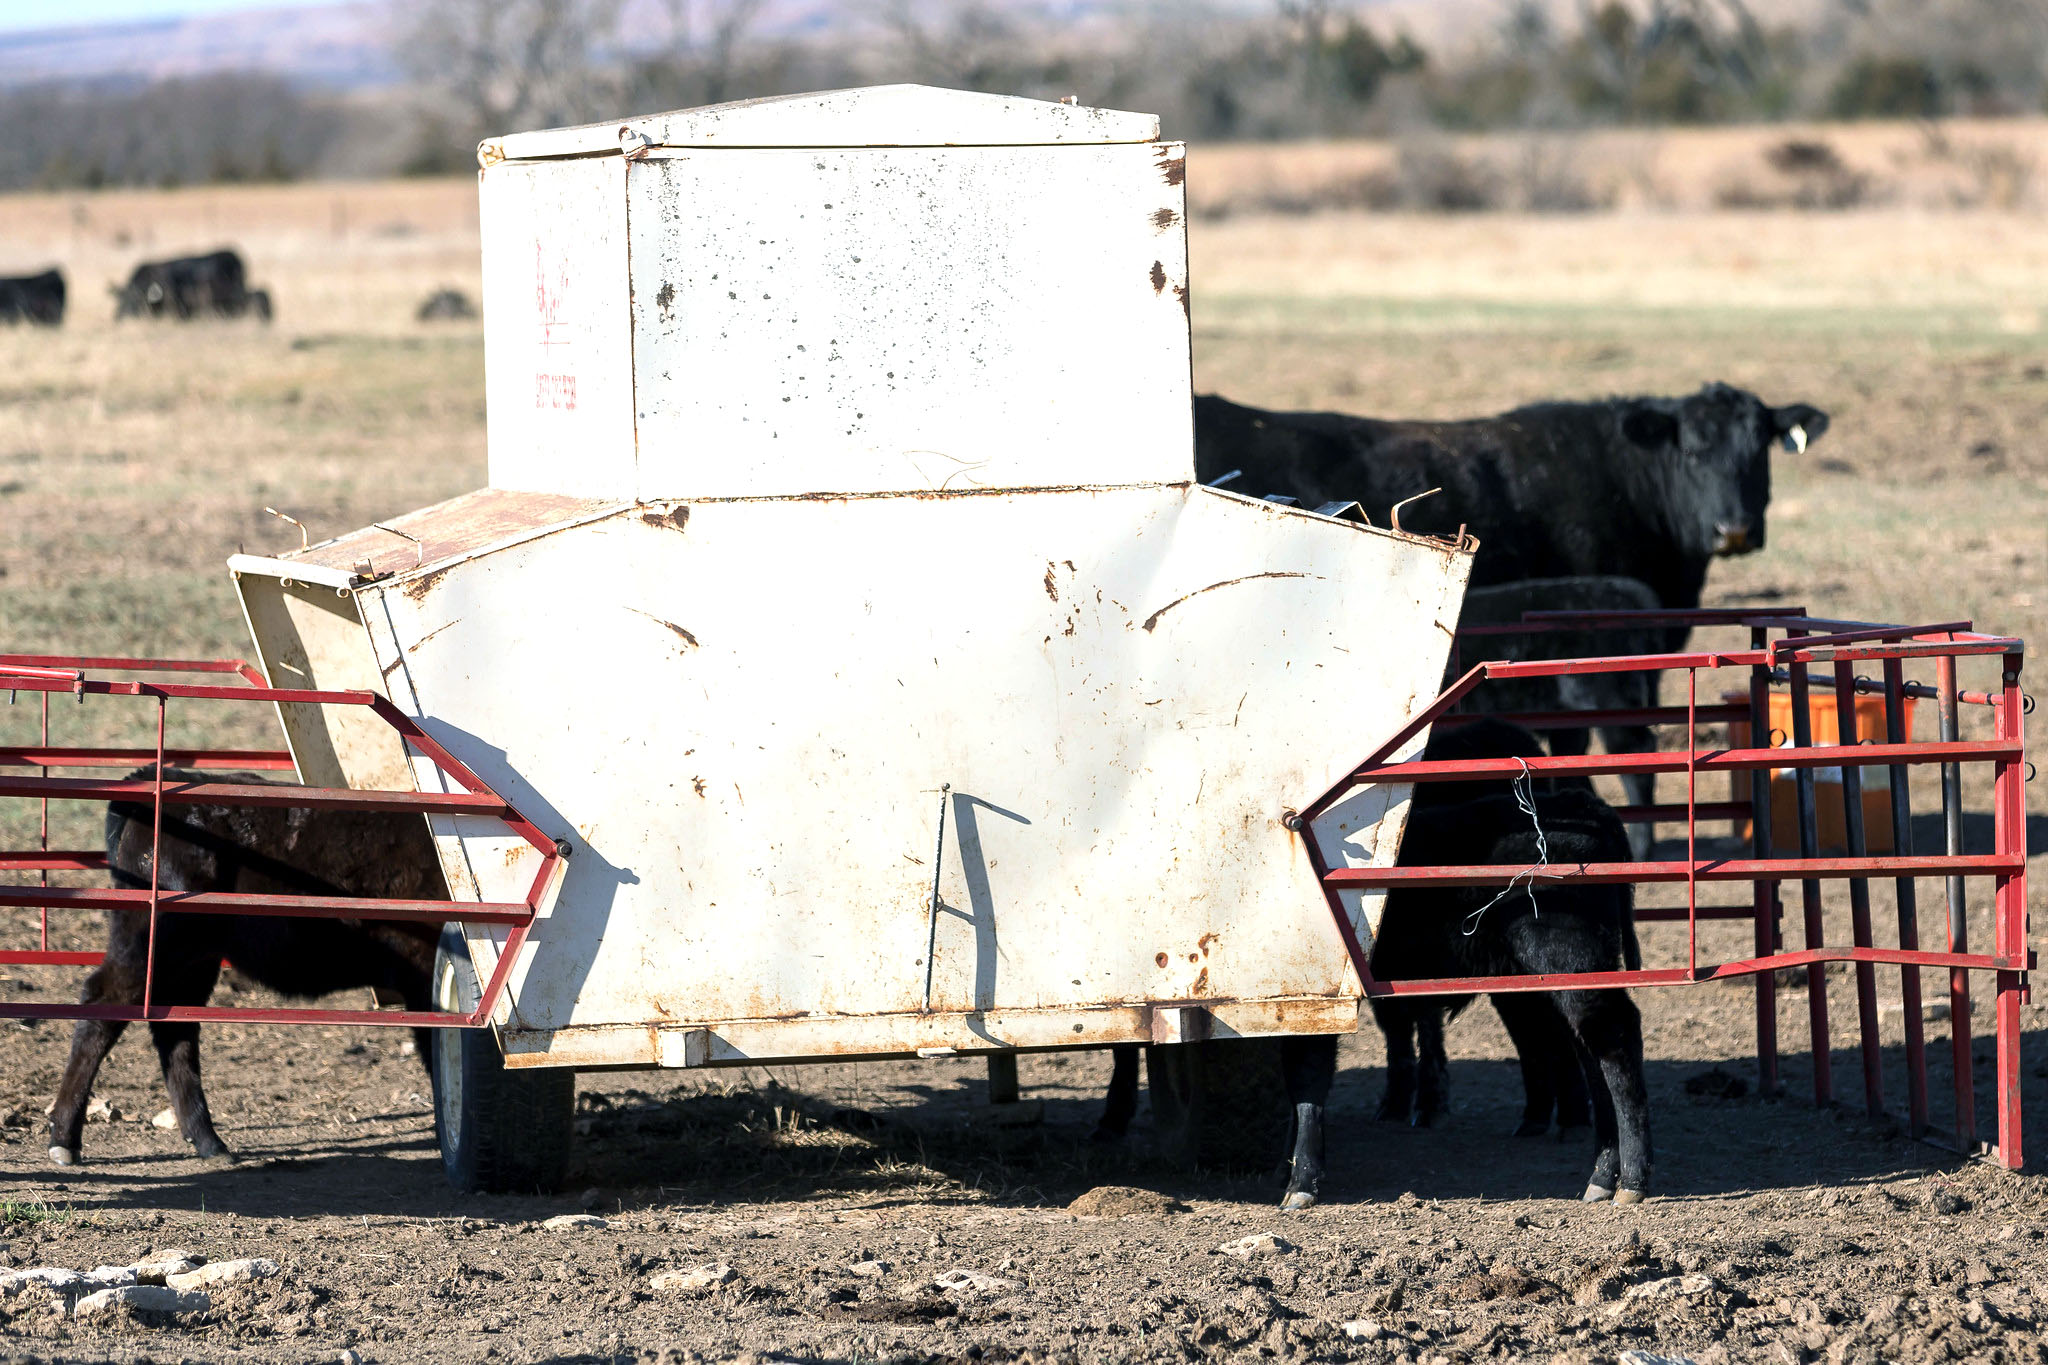 To help meet their nutritional needs calves sometimes are offered creep feed while still nursing their dams. (Photo courtesy of Kansas State University Research and Extension.)